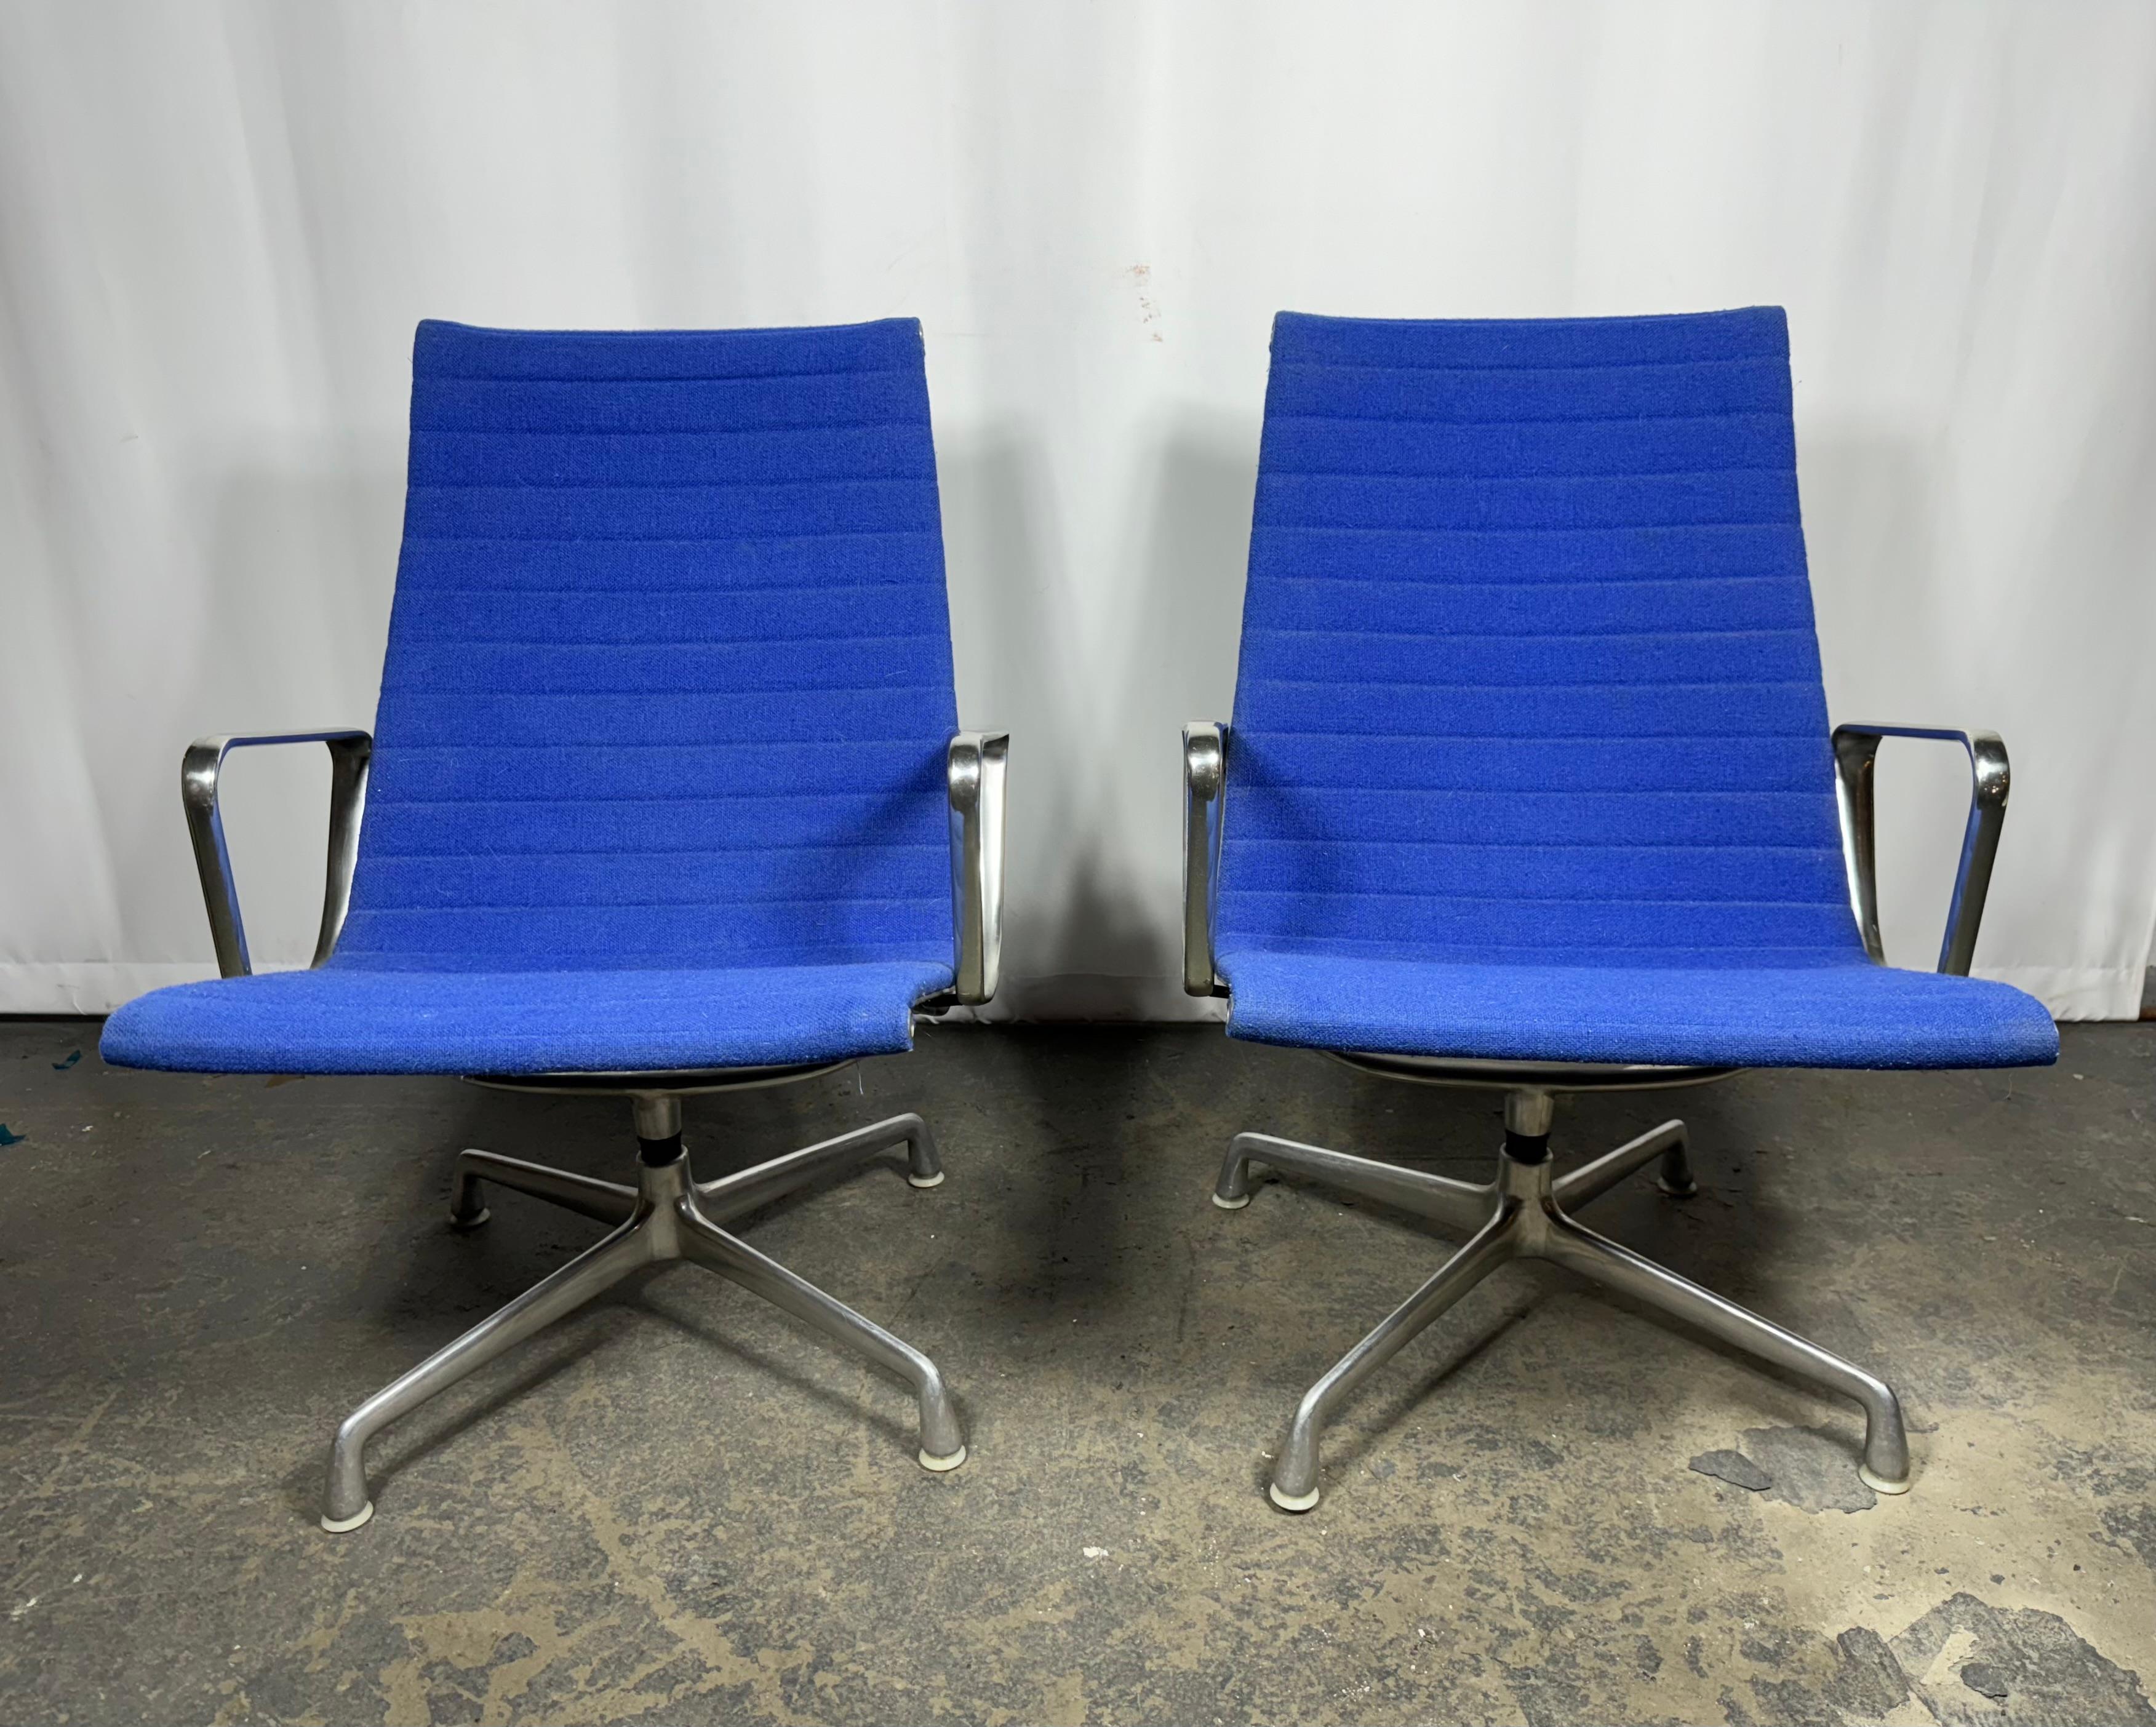 Stunning Pair Electric Blue  Eames lounge chairs from the 'Aluminium Group'.Collection. 

Designed by Charles and Ray Eames in 1958, The aluminium chair is one of the most outstanding furniture designs of the 20th century.

In great condition with